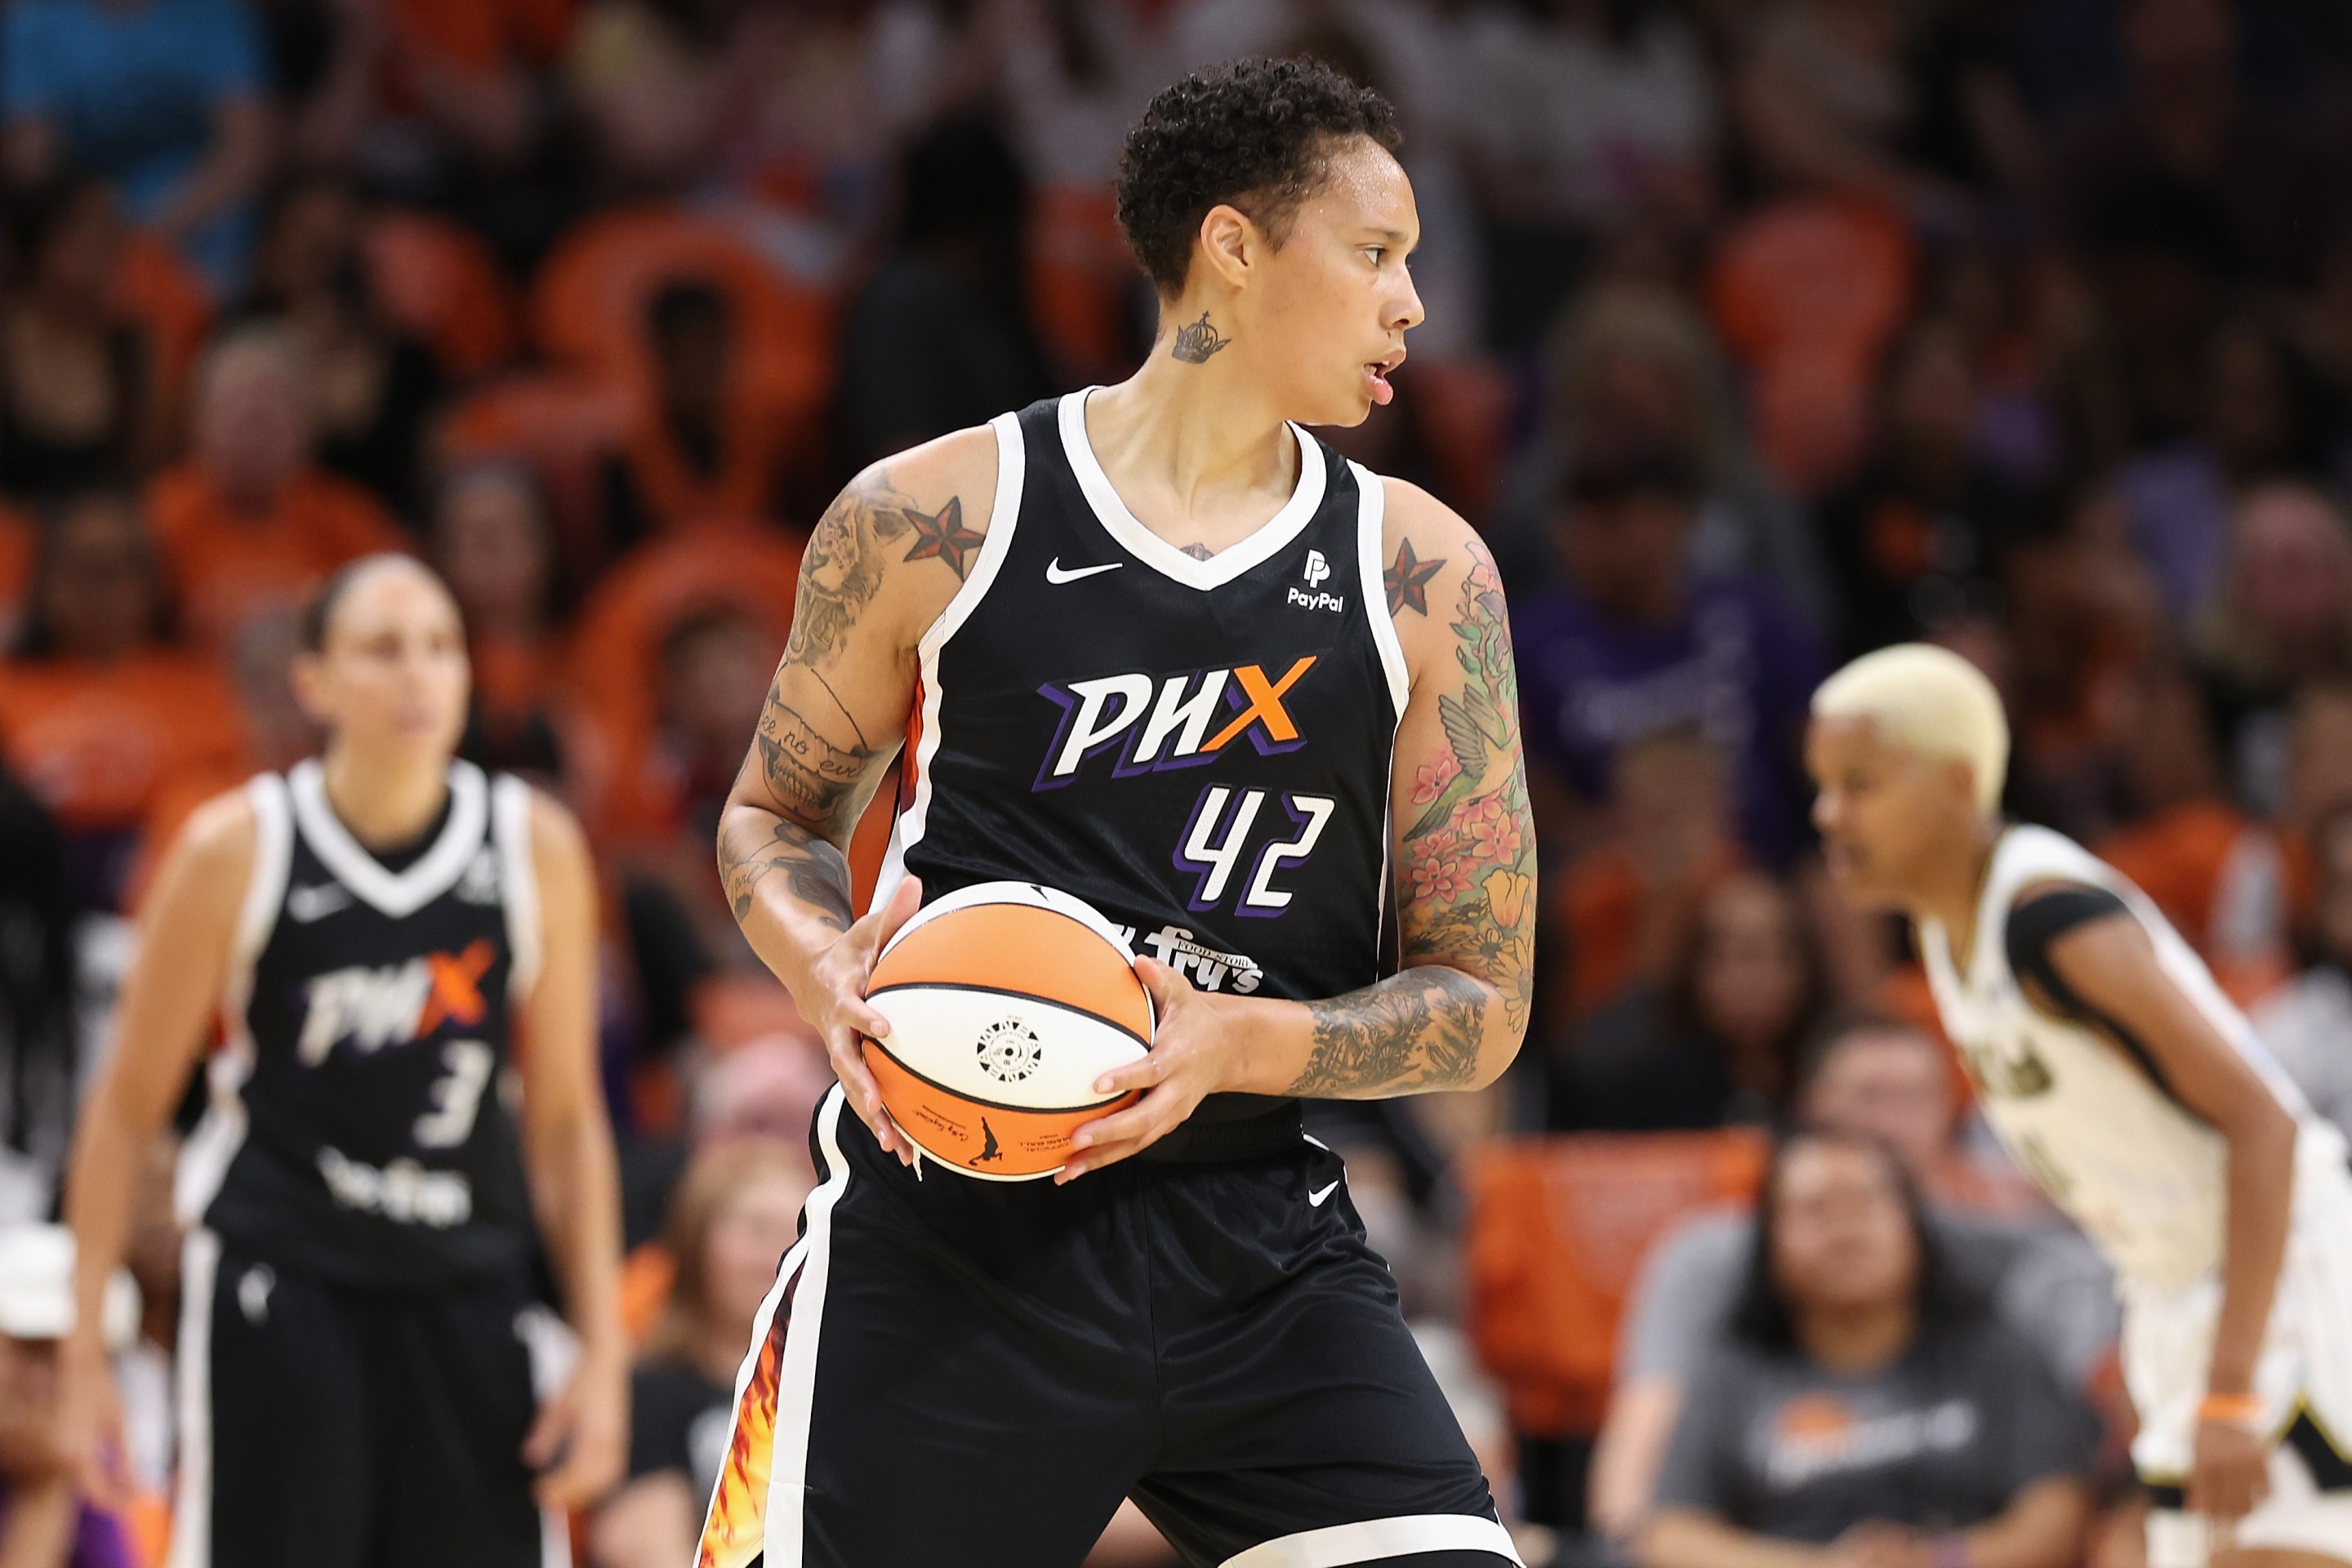 PHOENIX, ARIZONA - MAY 21: Brittney Griner #42 of the Phoenix Mercury handles the ball during the first half of the WNBA game at Footprint Center on May 21, 2023 in Phoenix, Arizona.